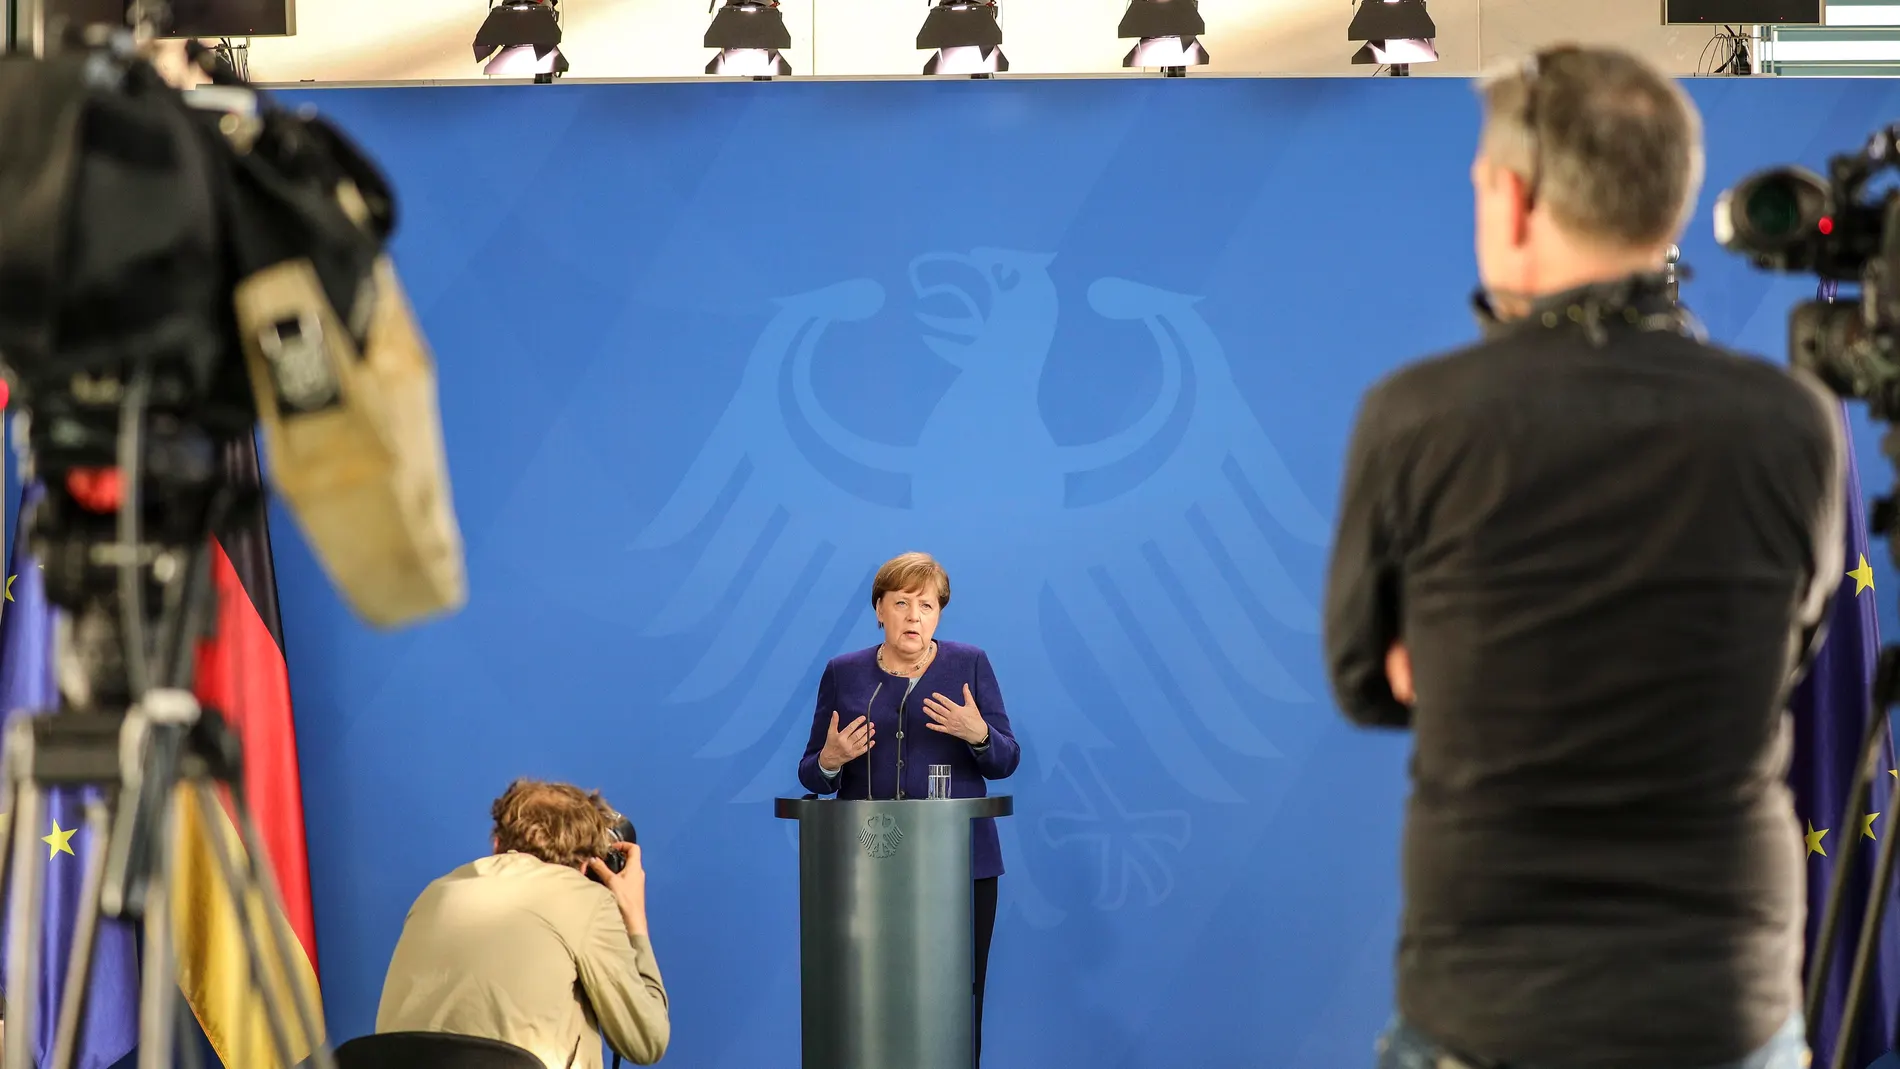 German Chancellor Merkel press conference on meeting with financial organizations